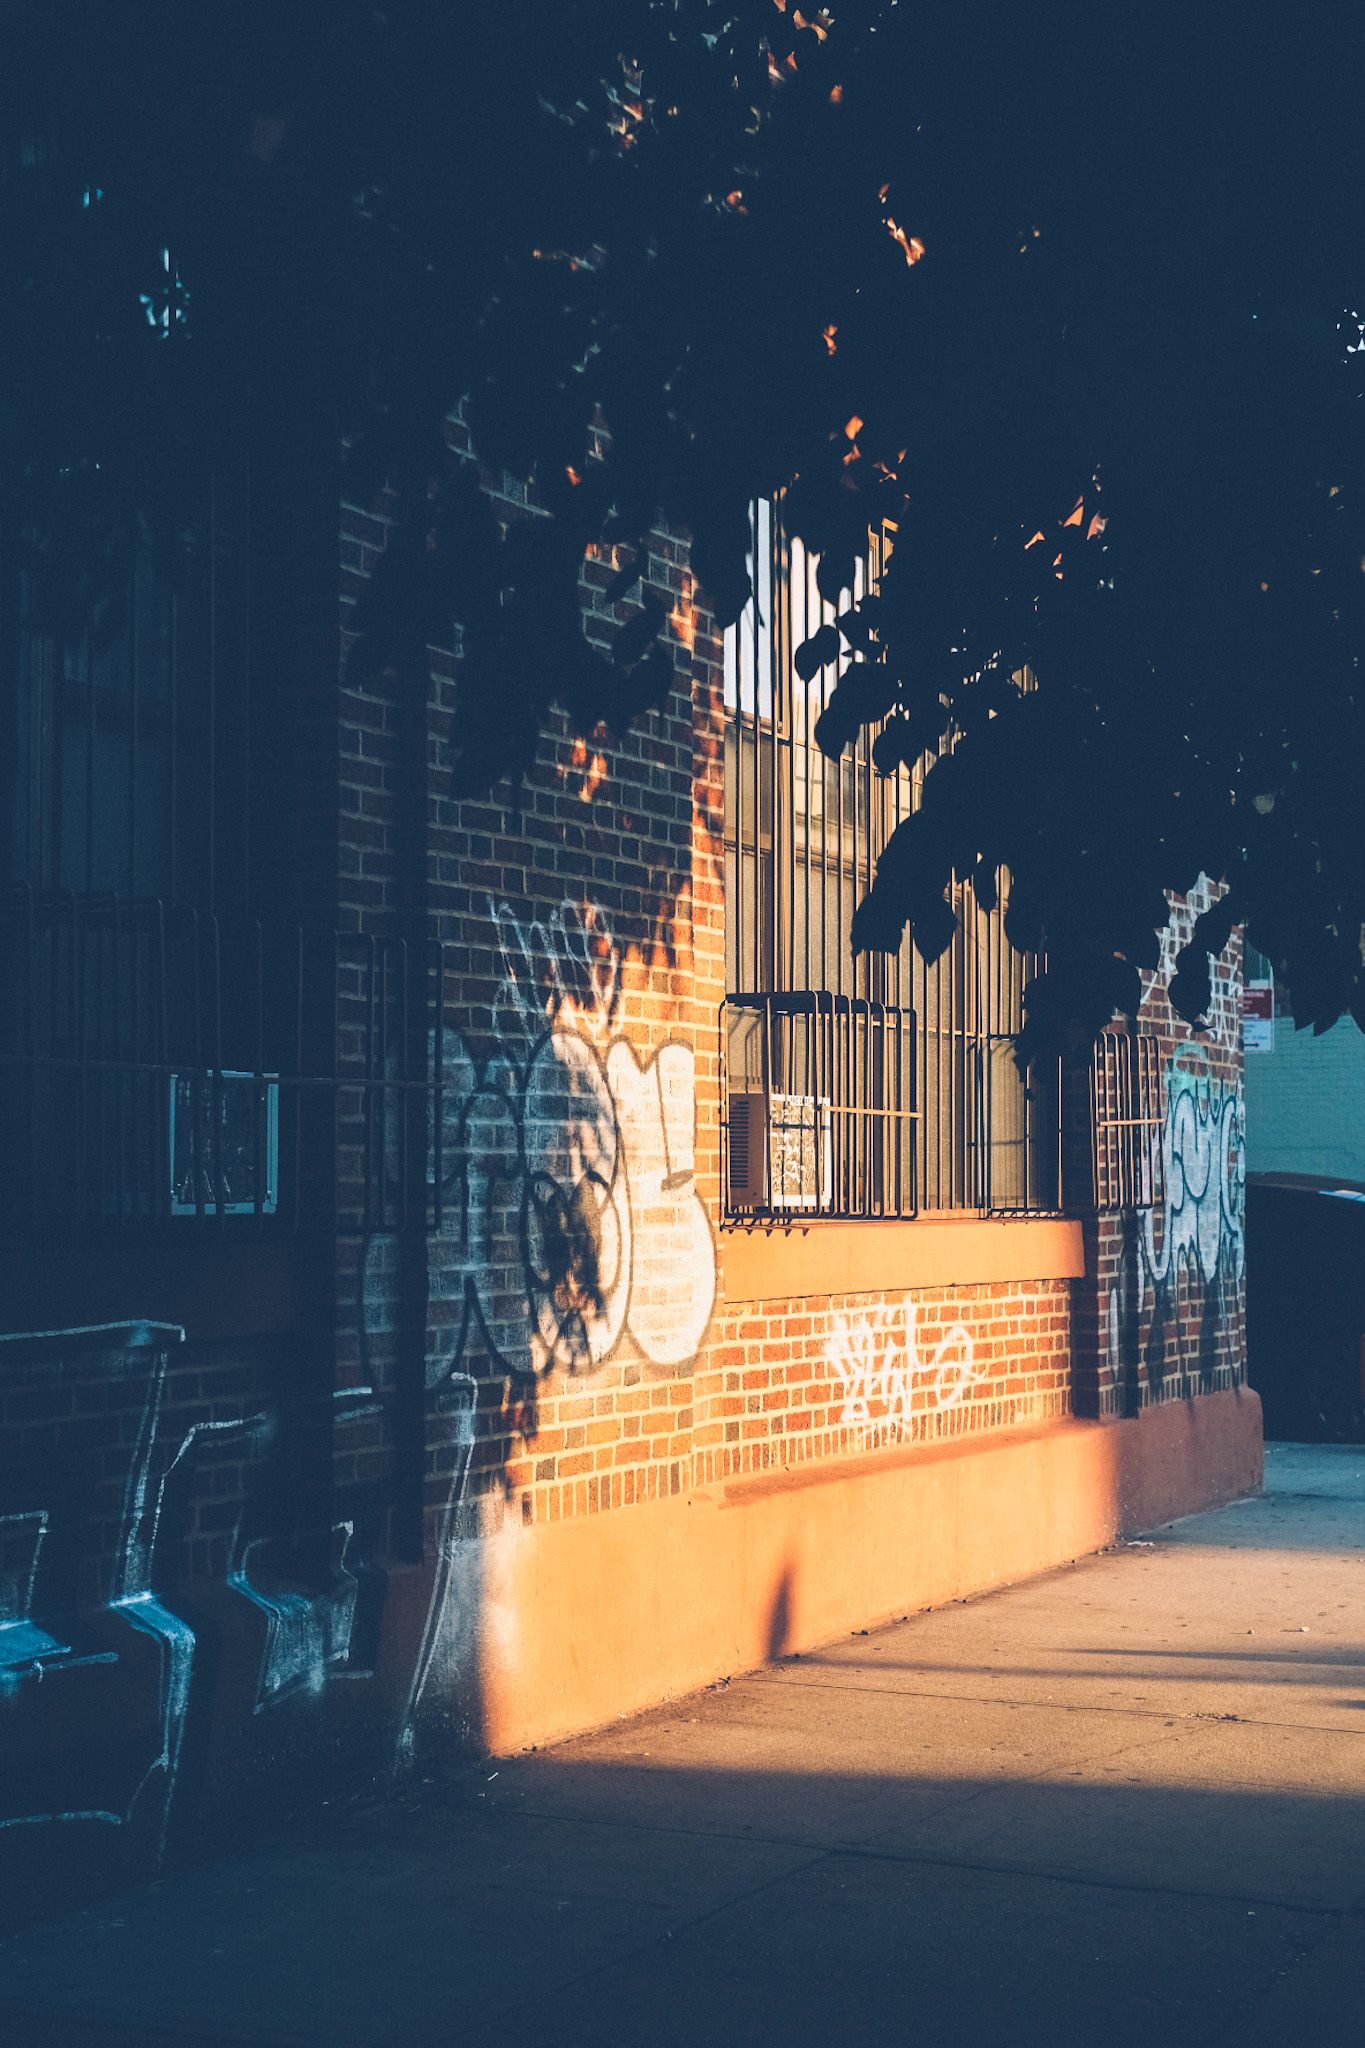 Orange sunlight falls on a brick wall with graffiti and black bars across the windows, underneath a tree’s silhouette.